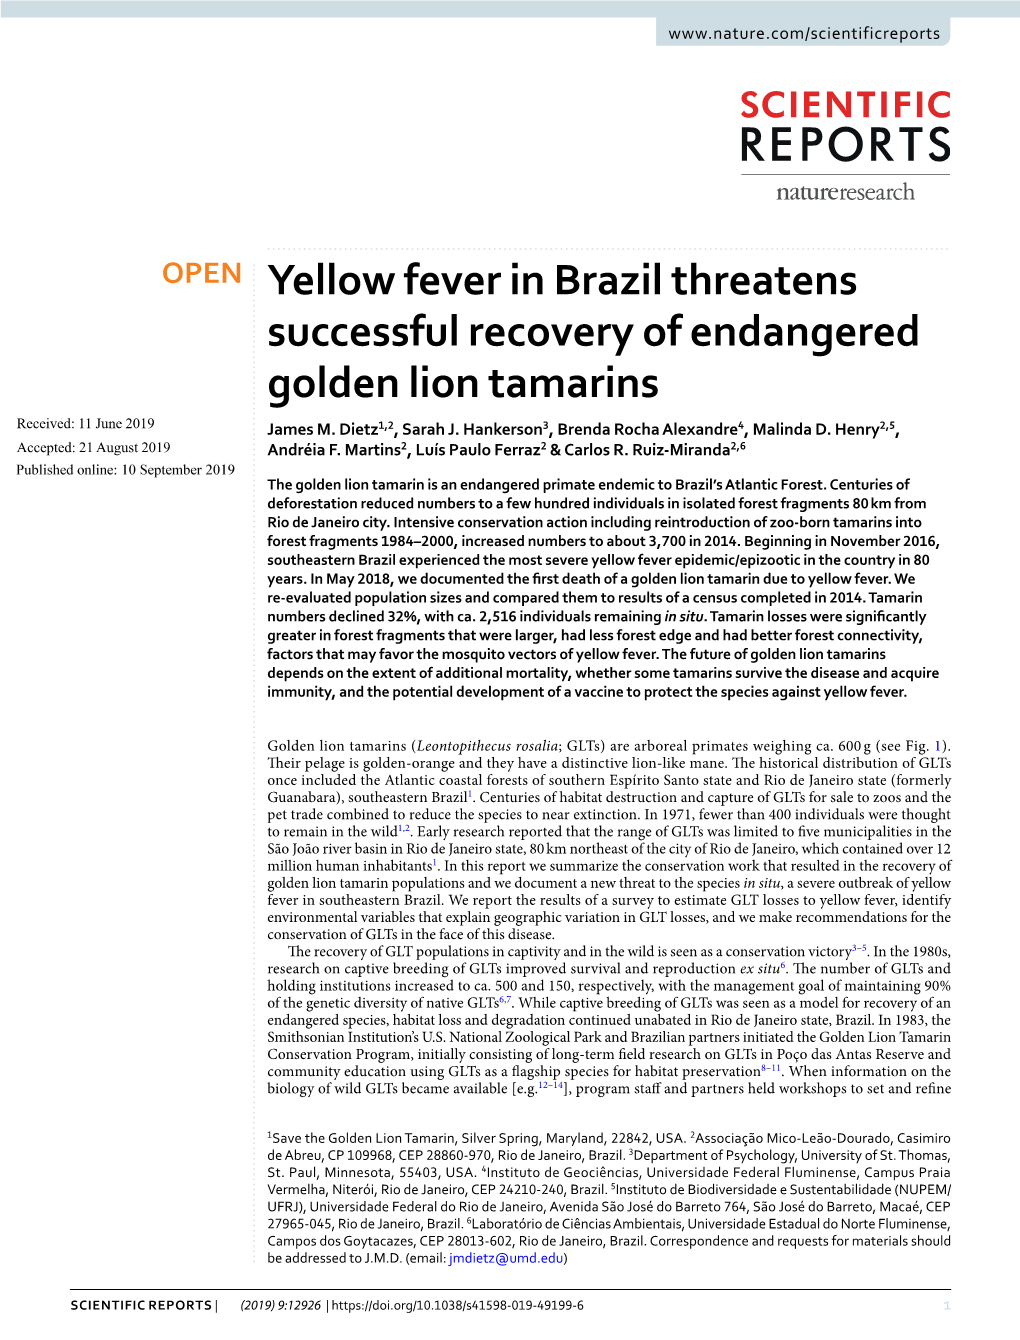 Yellow Fever in Brazil Threatens Successful Recovery of Endangered Golden Lion Tamarins Received: 11 June 2019 James M